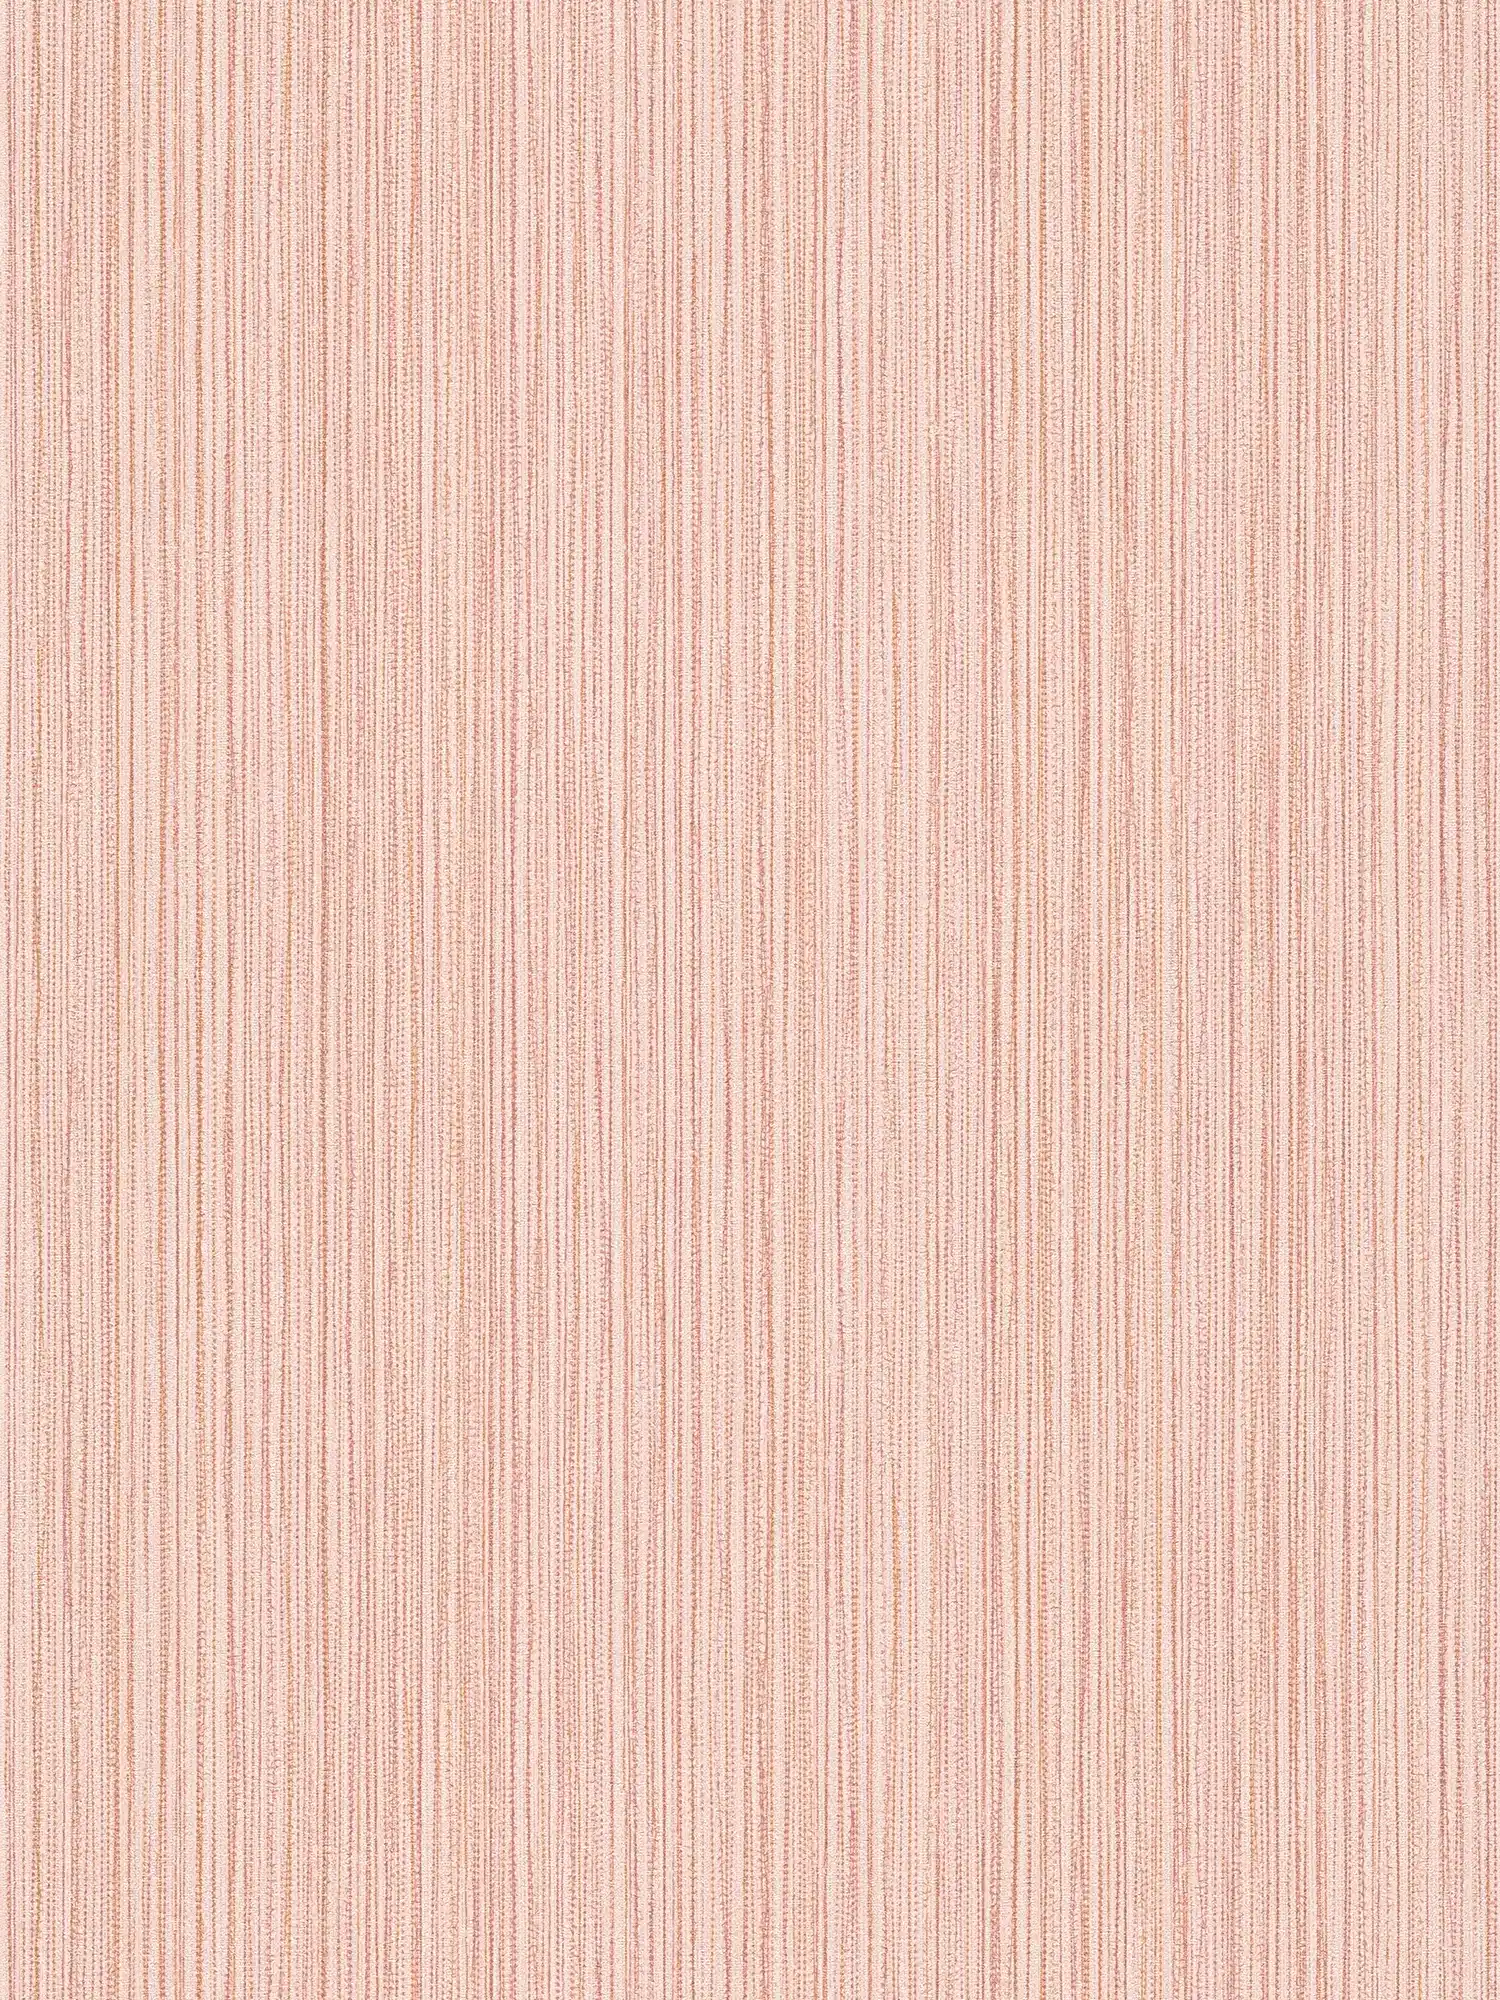 Pink wallpaper non-woven lined with metallic luster - pink
